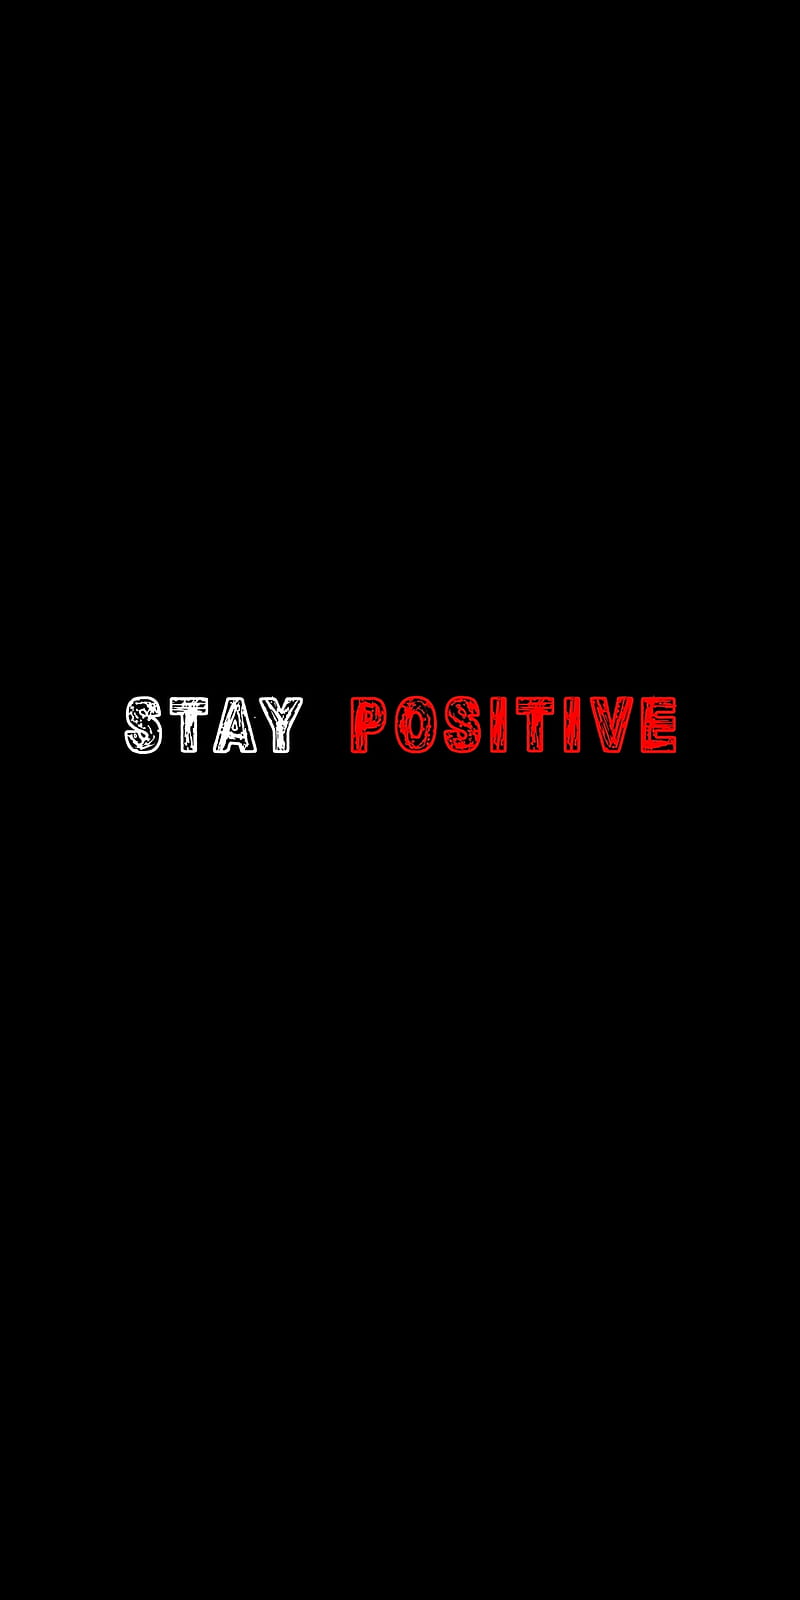 Stay Positive Amoled Wallpaper | Cool nike wallpapers, Positive wallpapers,  Wallpaper